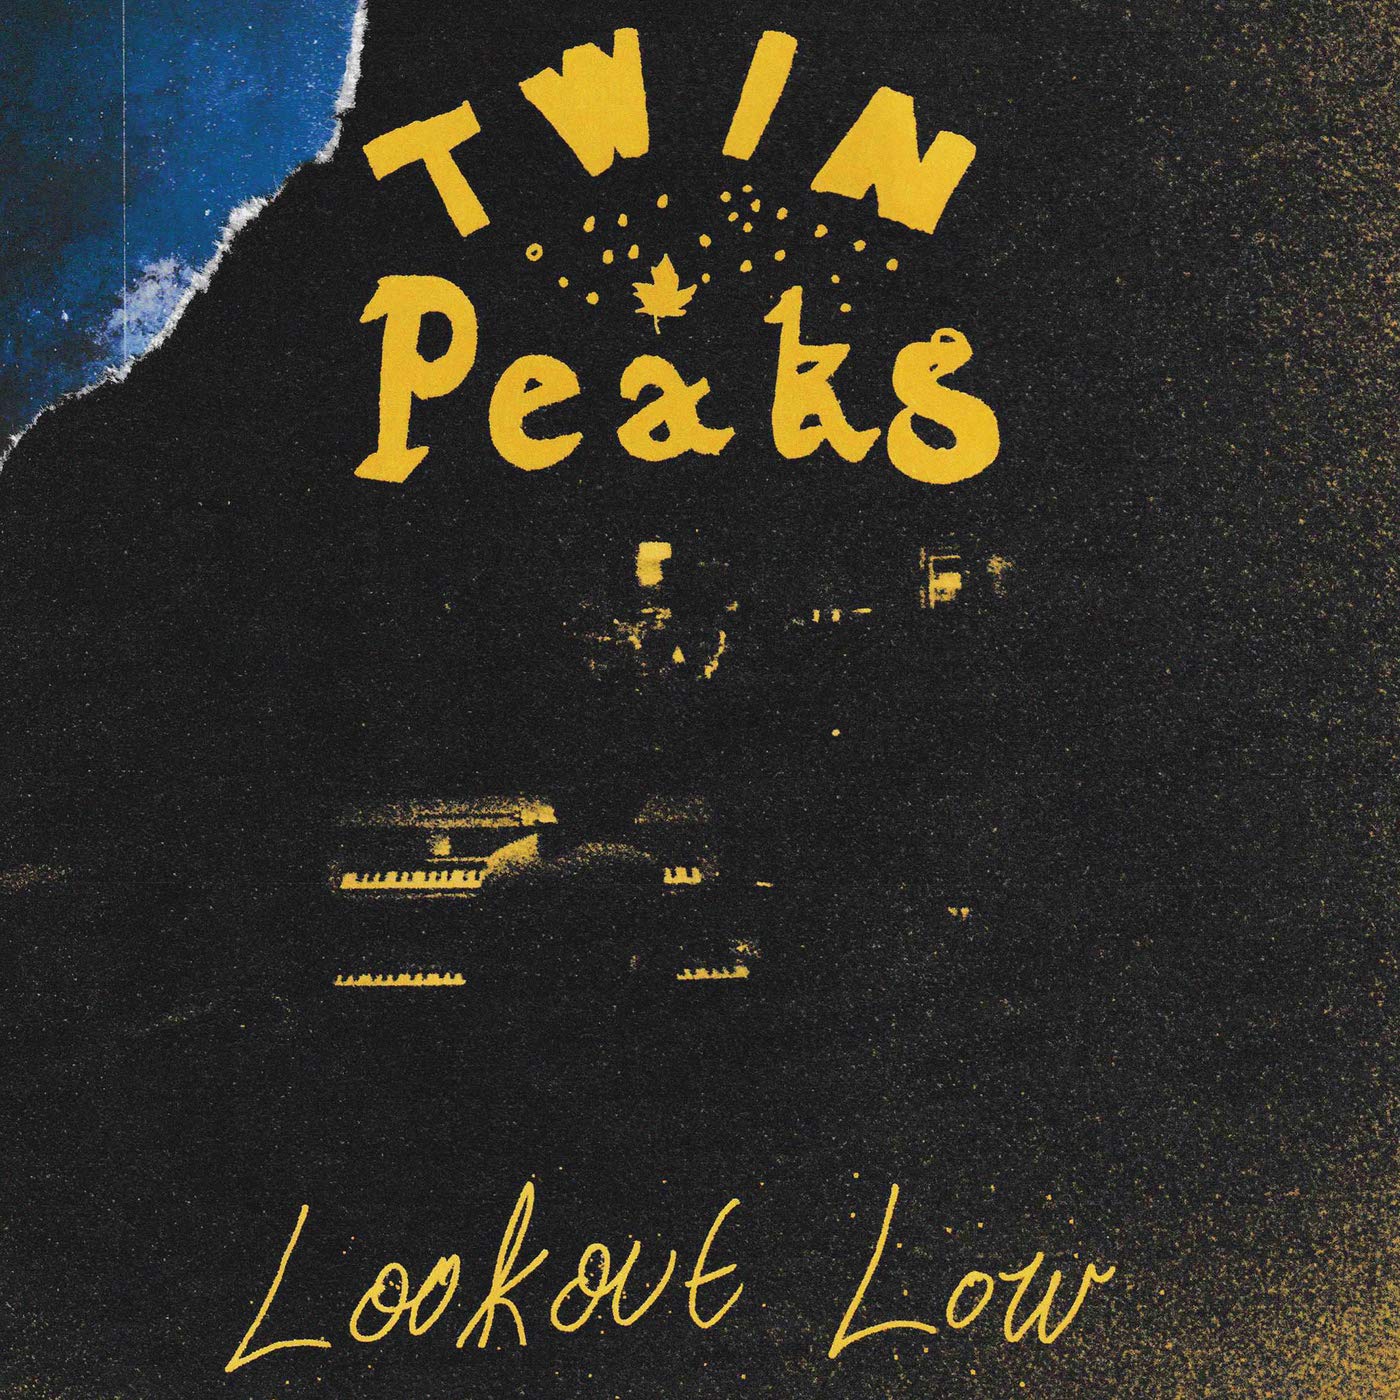 Cover zu „Lookout Low“ von Twin Peaks